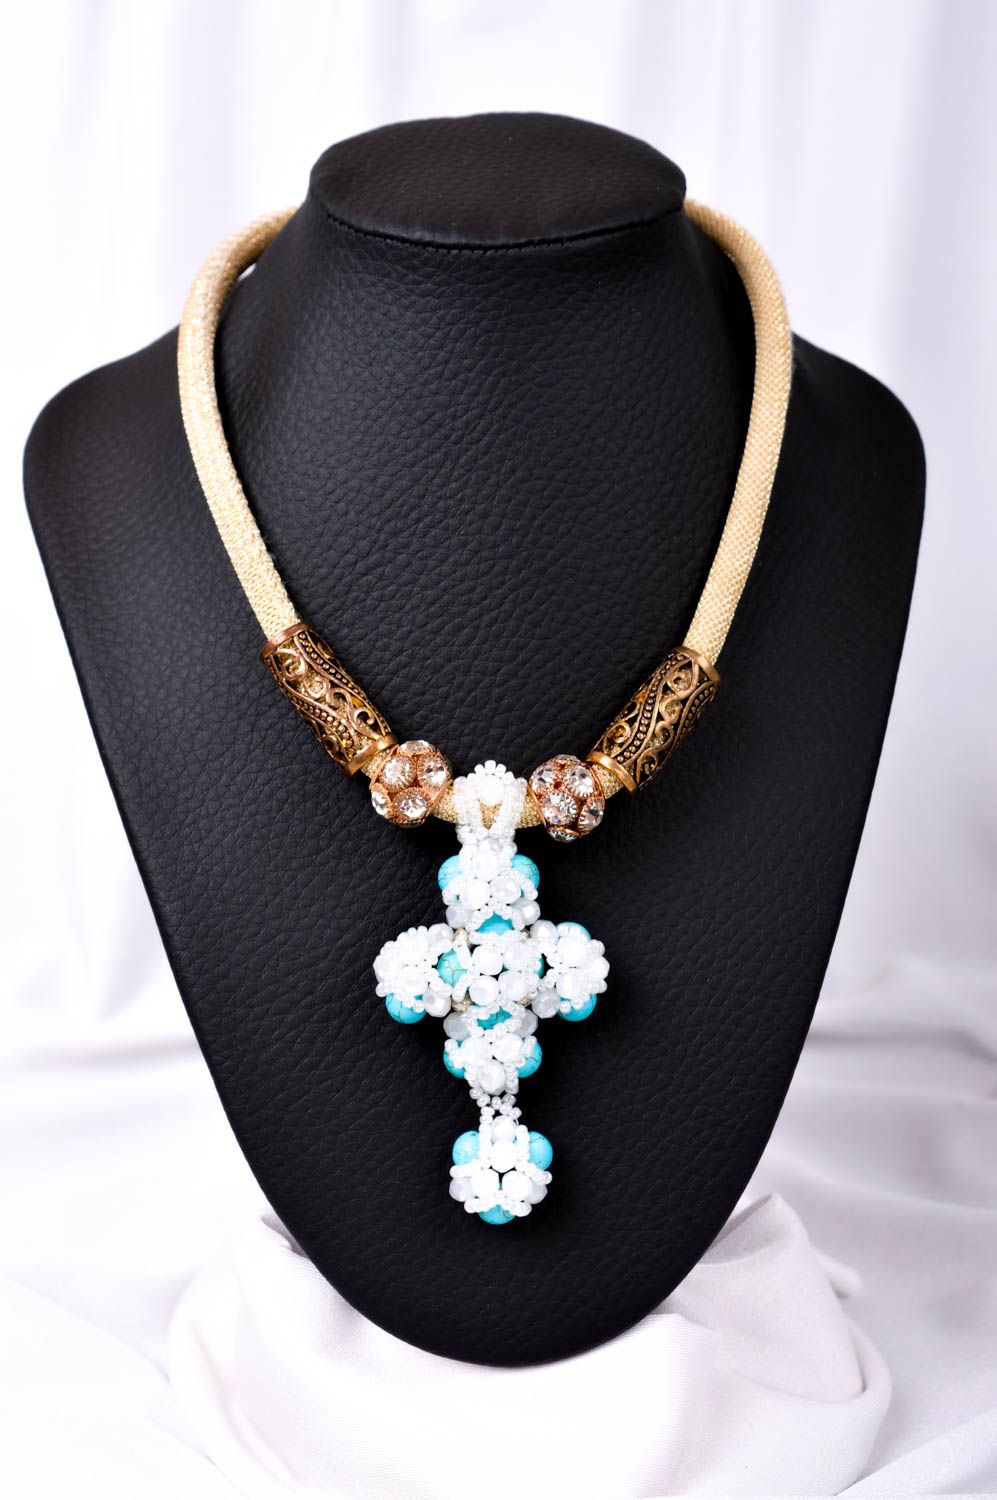 Handmade necklace designer necklace with stones unusual jewelry for women photo 1